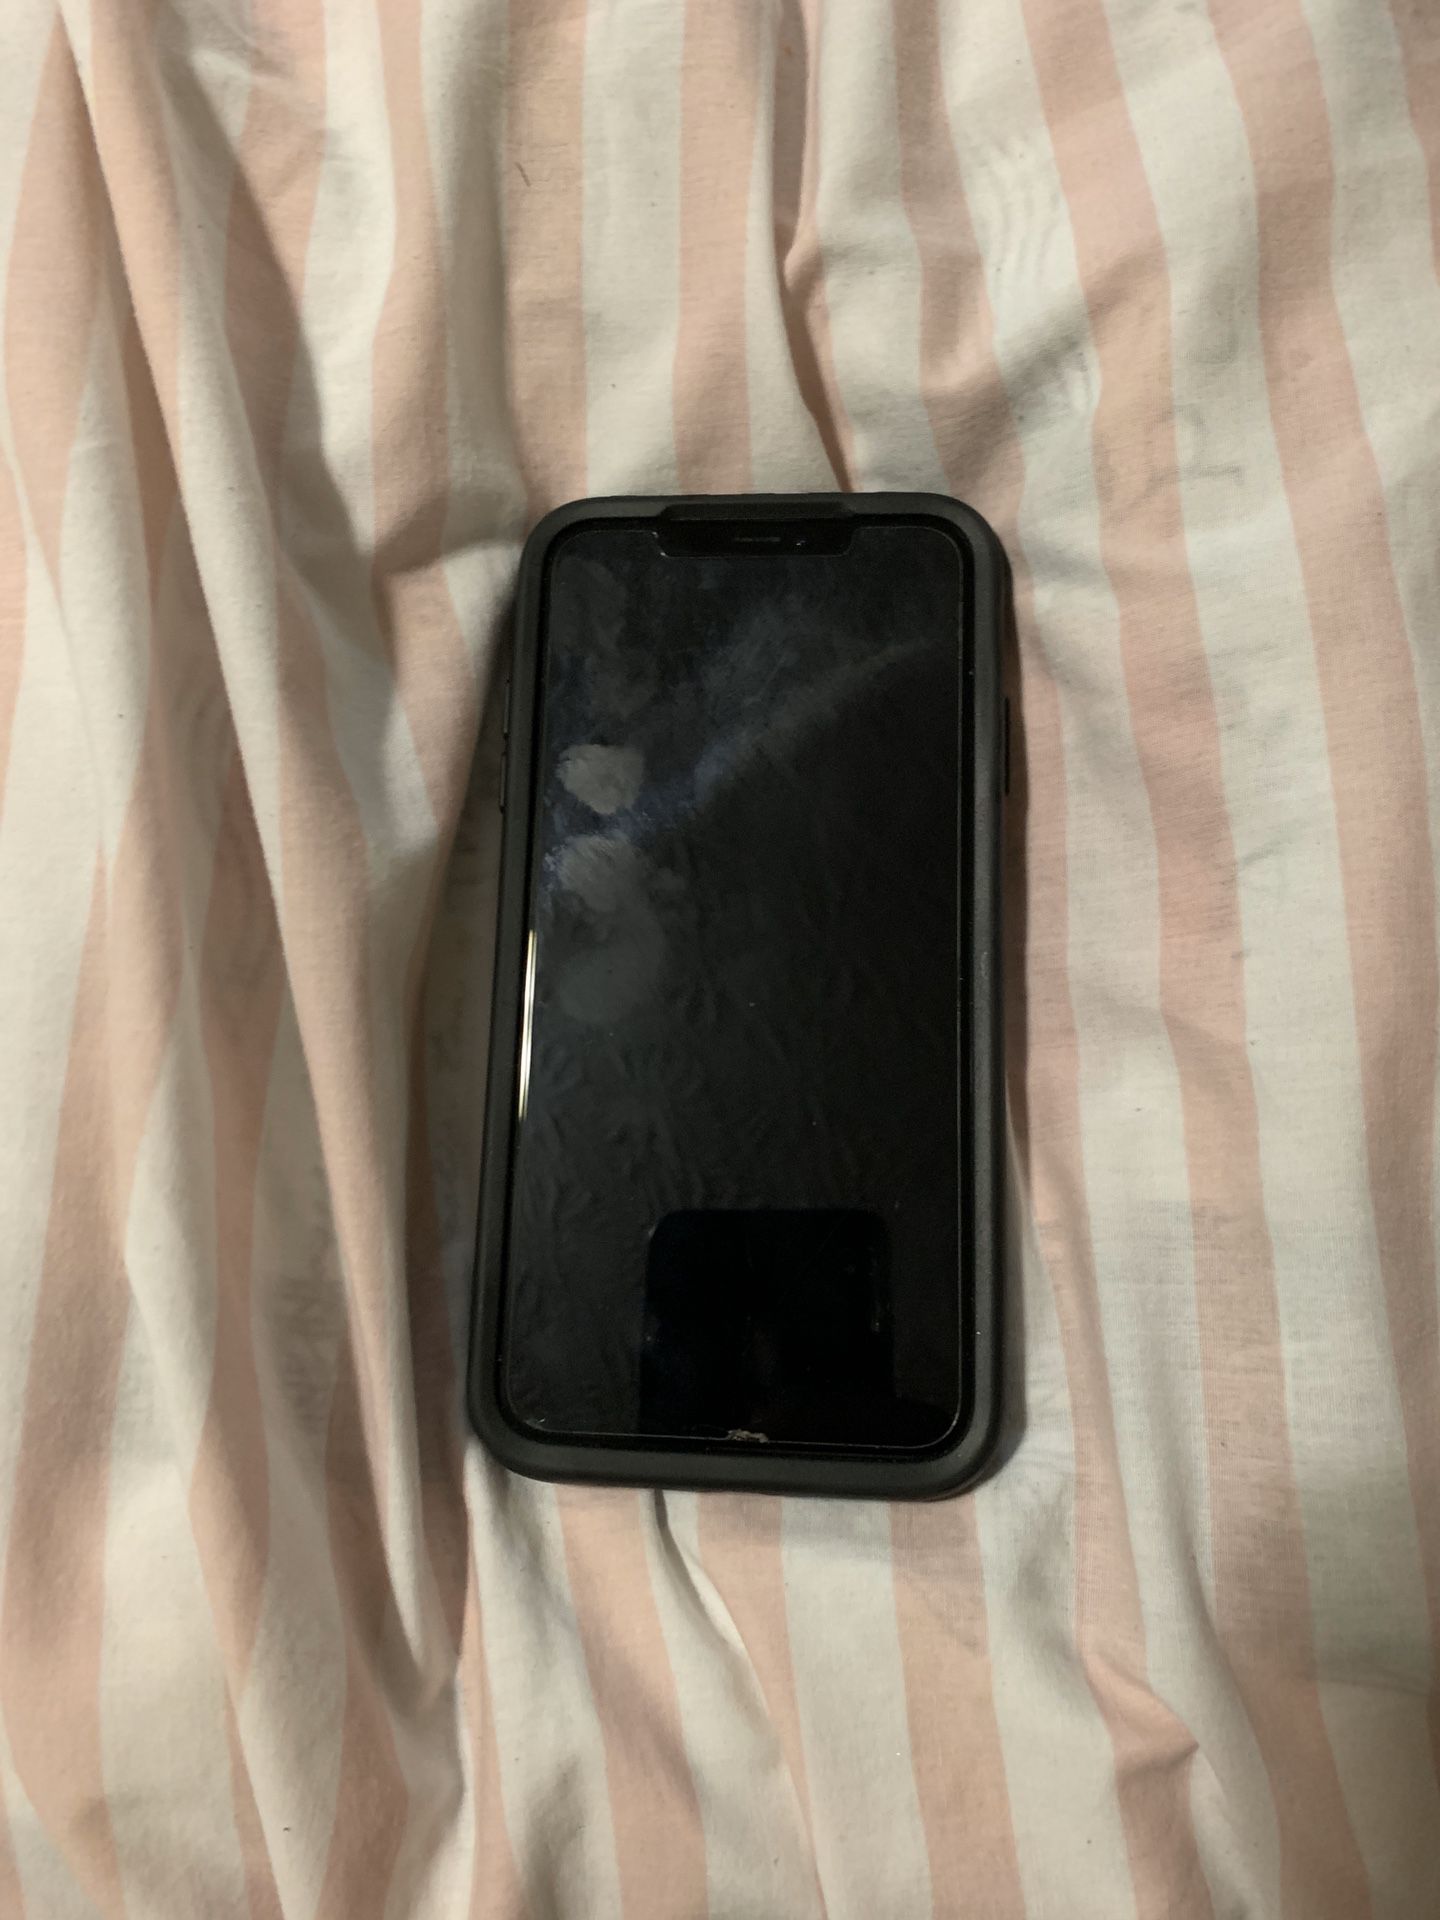 iPhone XS Max - For Sale 256GB